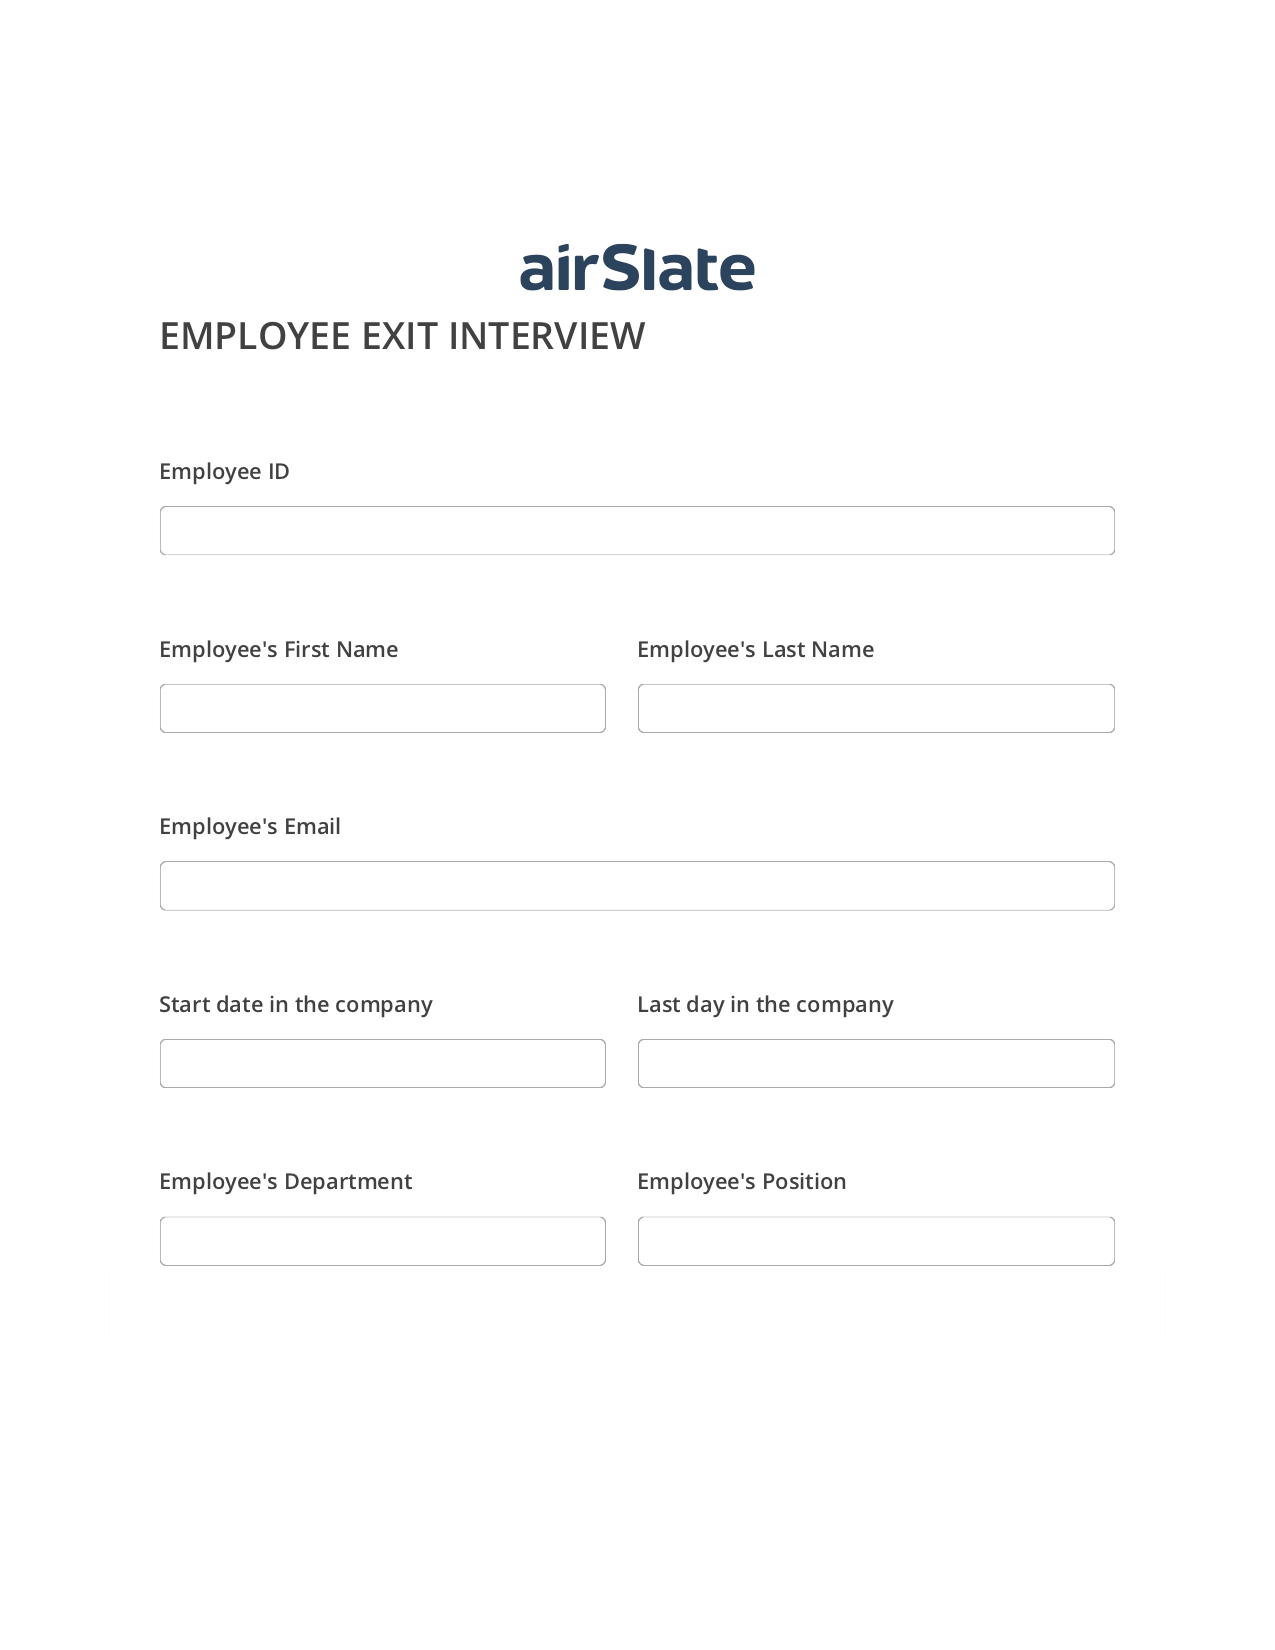 Employee Exit Interview Workflow Pre-fill Document Bot, Send a Slate to MS Dynamics 365 Contact Bot, Archive to SharePoint Folder Bot